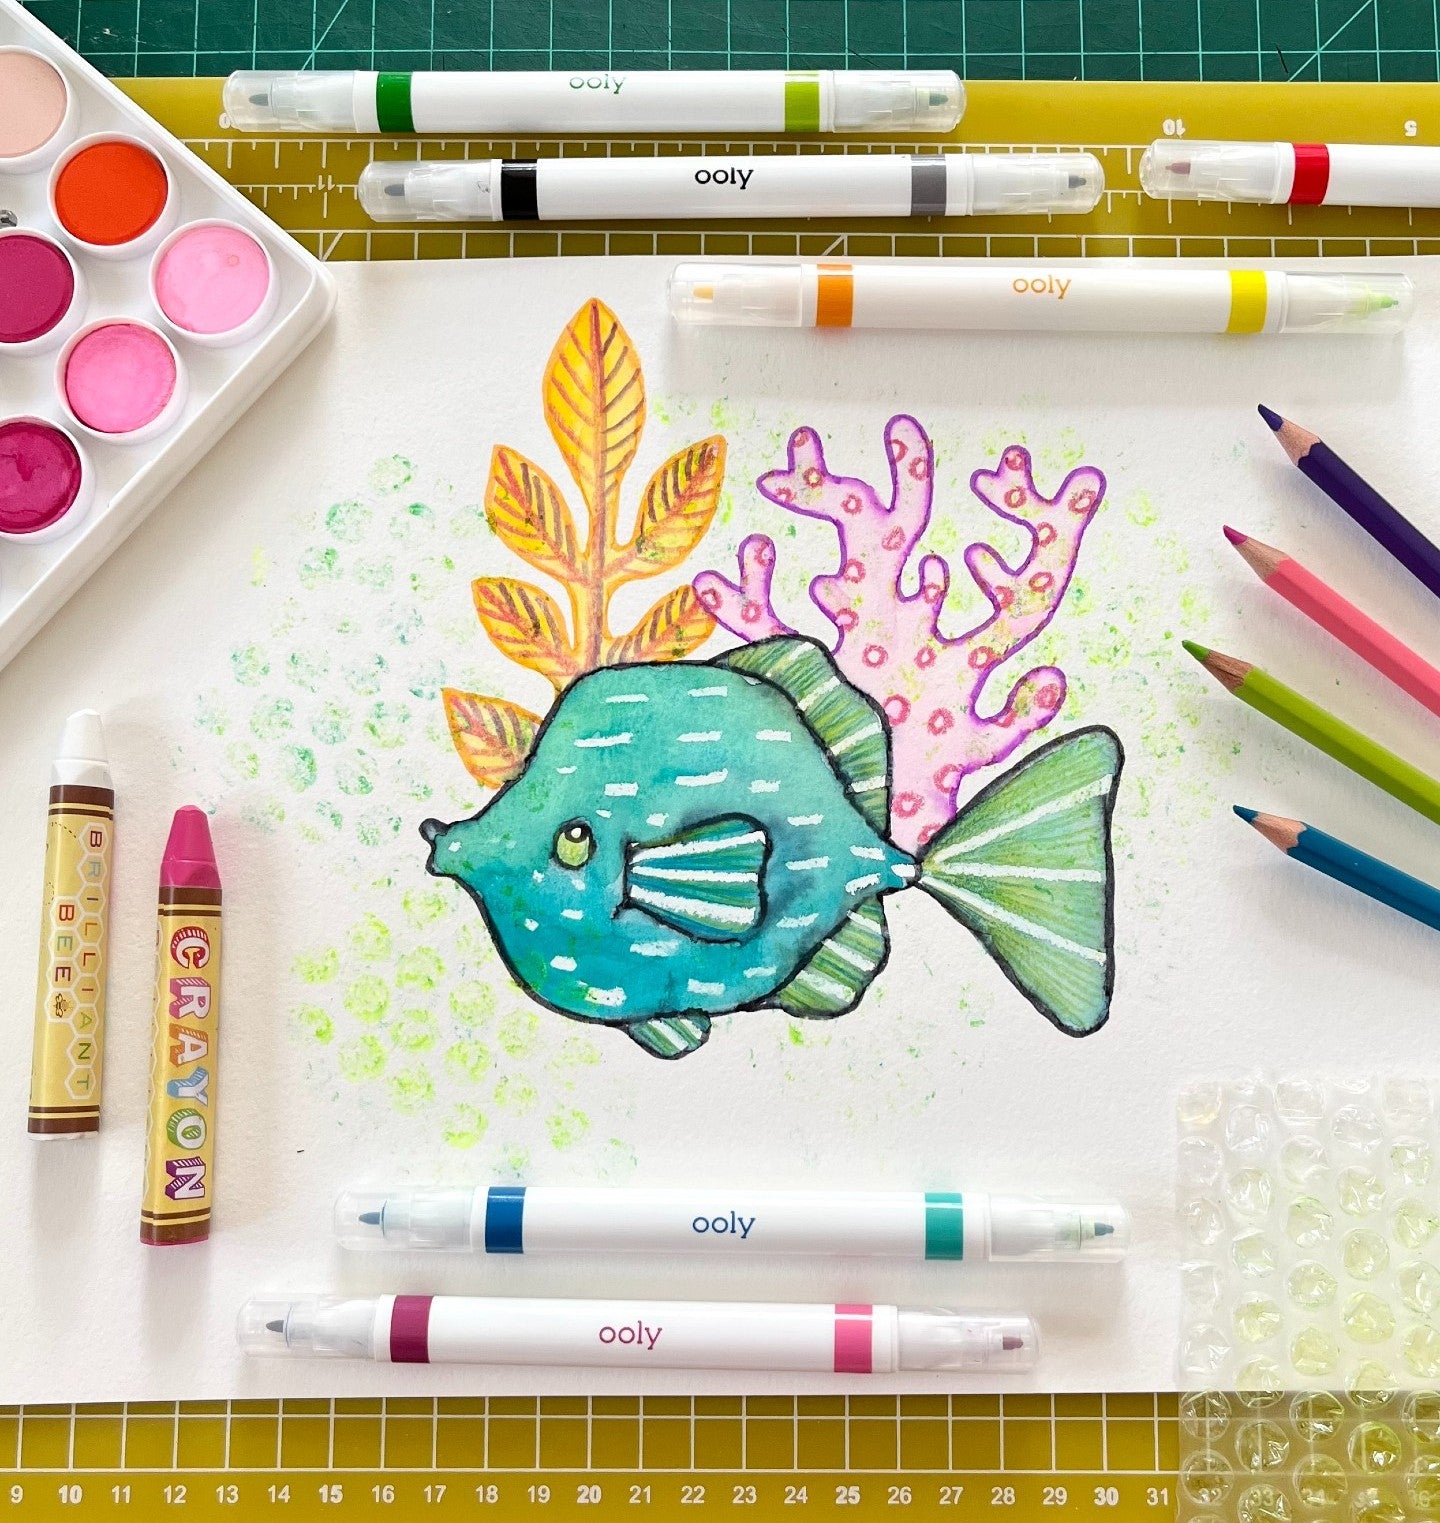 Colorful fish on white paper with markers, crayons and colored pencils on a graph board